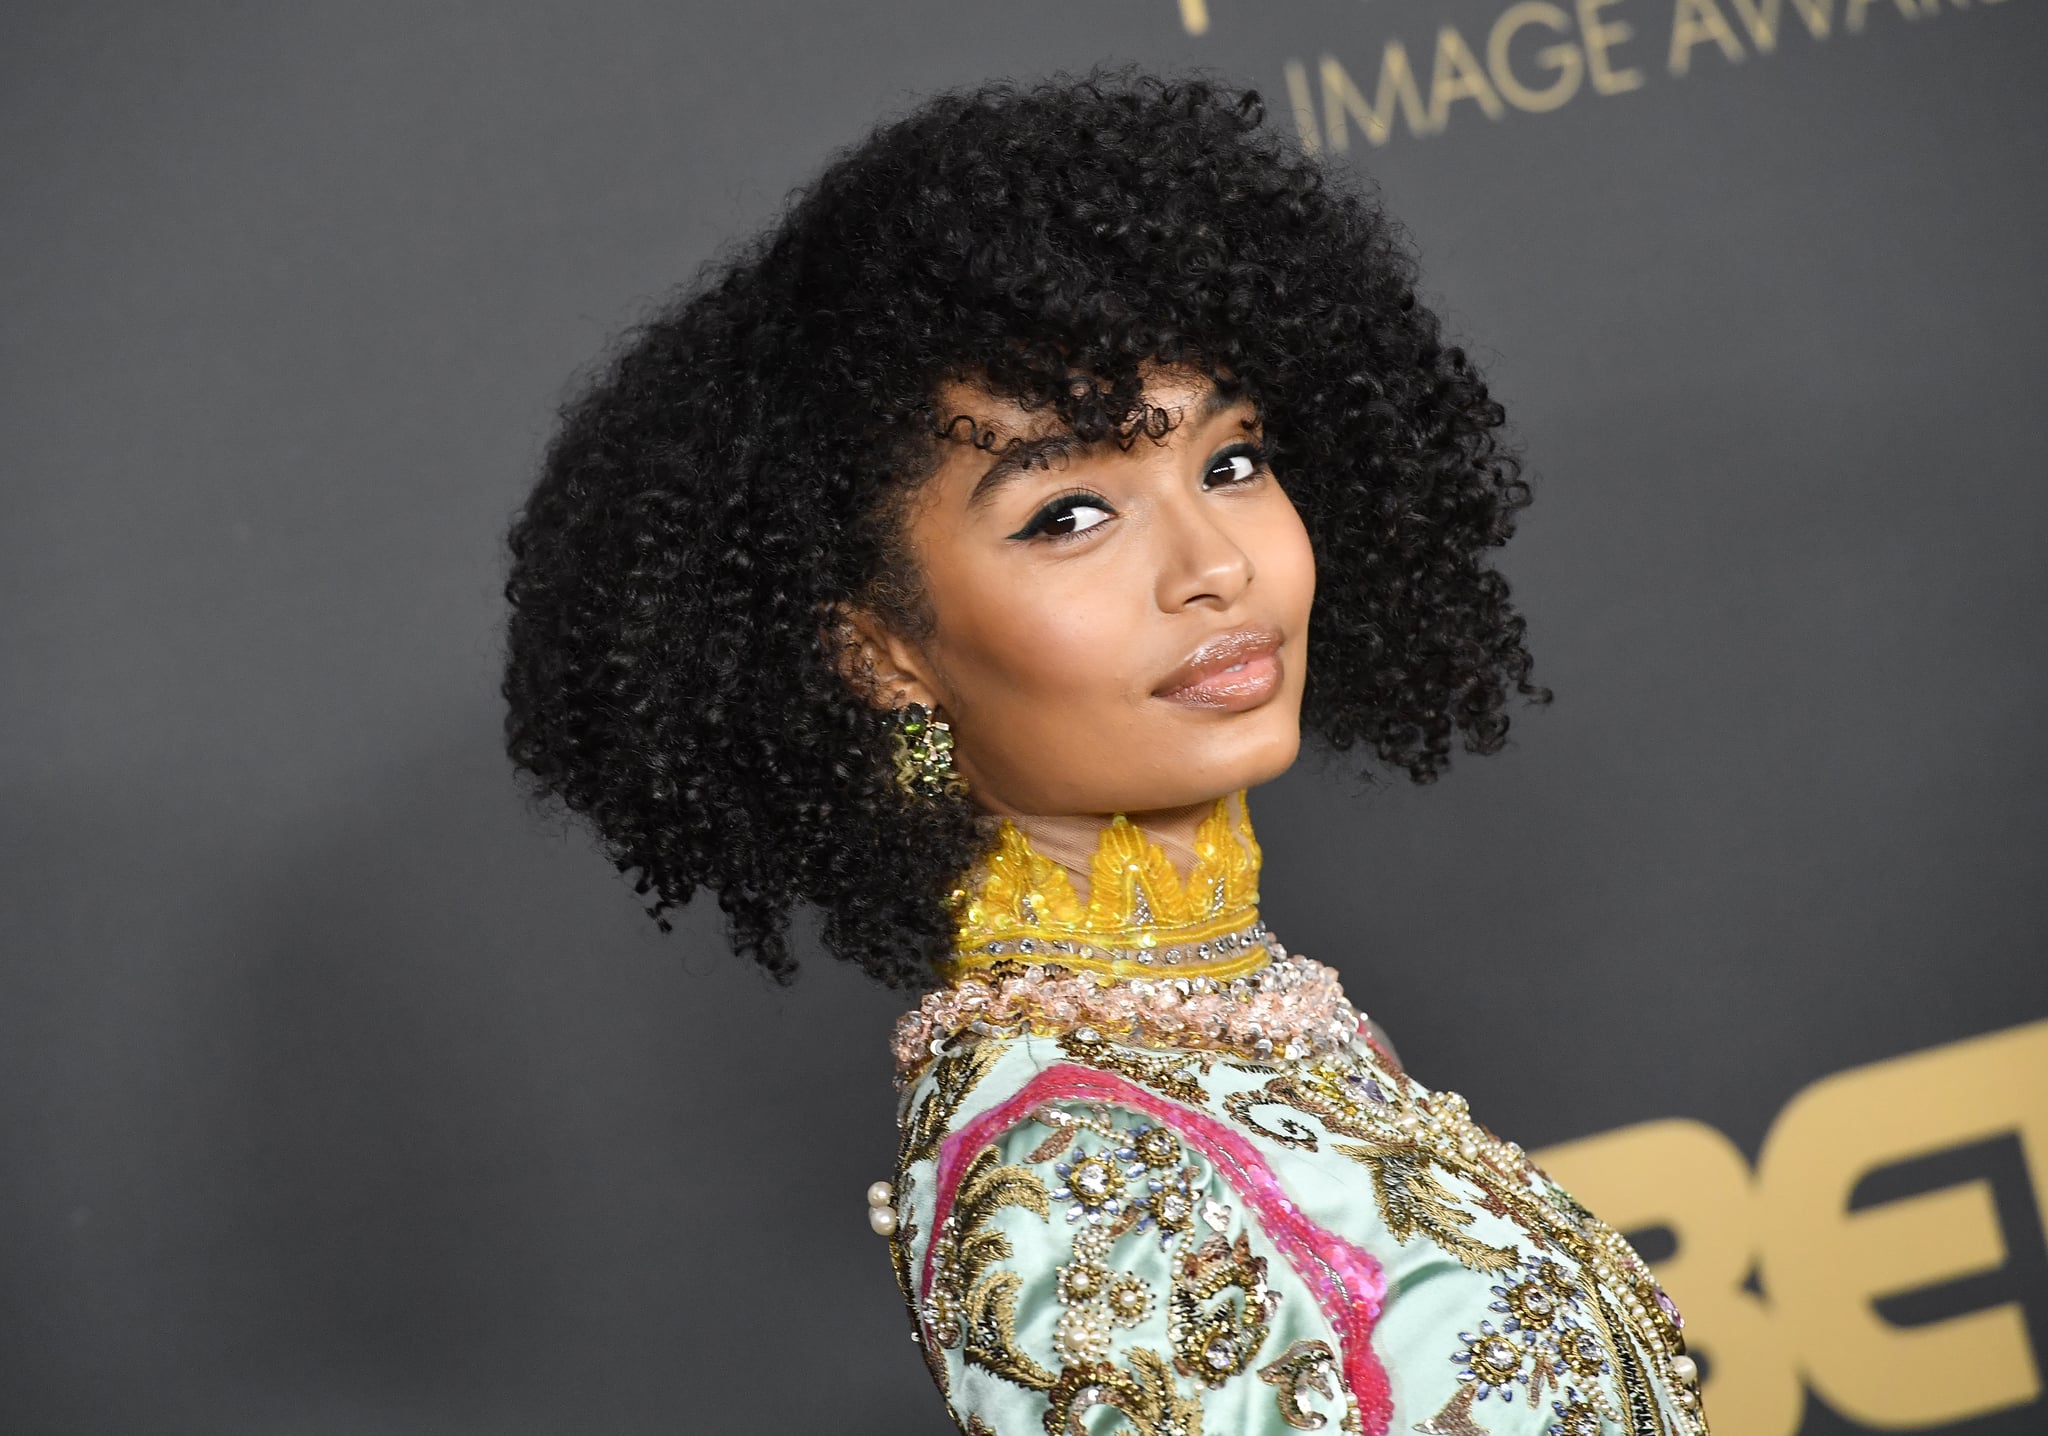 PASADENA, CALIFORNIA - FEBRUARY 22: Yara Shahidi attends the 51st NAACP Image Awards, Presented by BET, at Pasadena Civic Auditorium on February 22, 2020 in Pasadena, California. (Photo by Frazer Harrison/Getty Images)